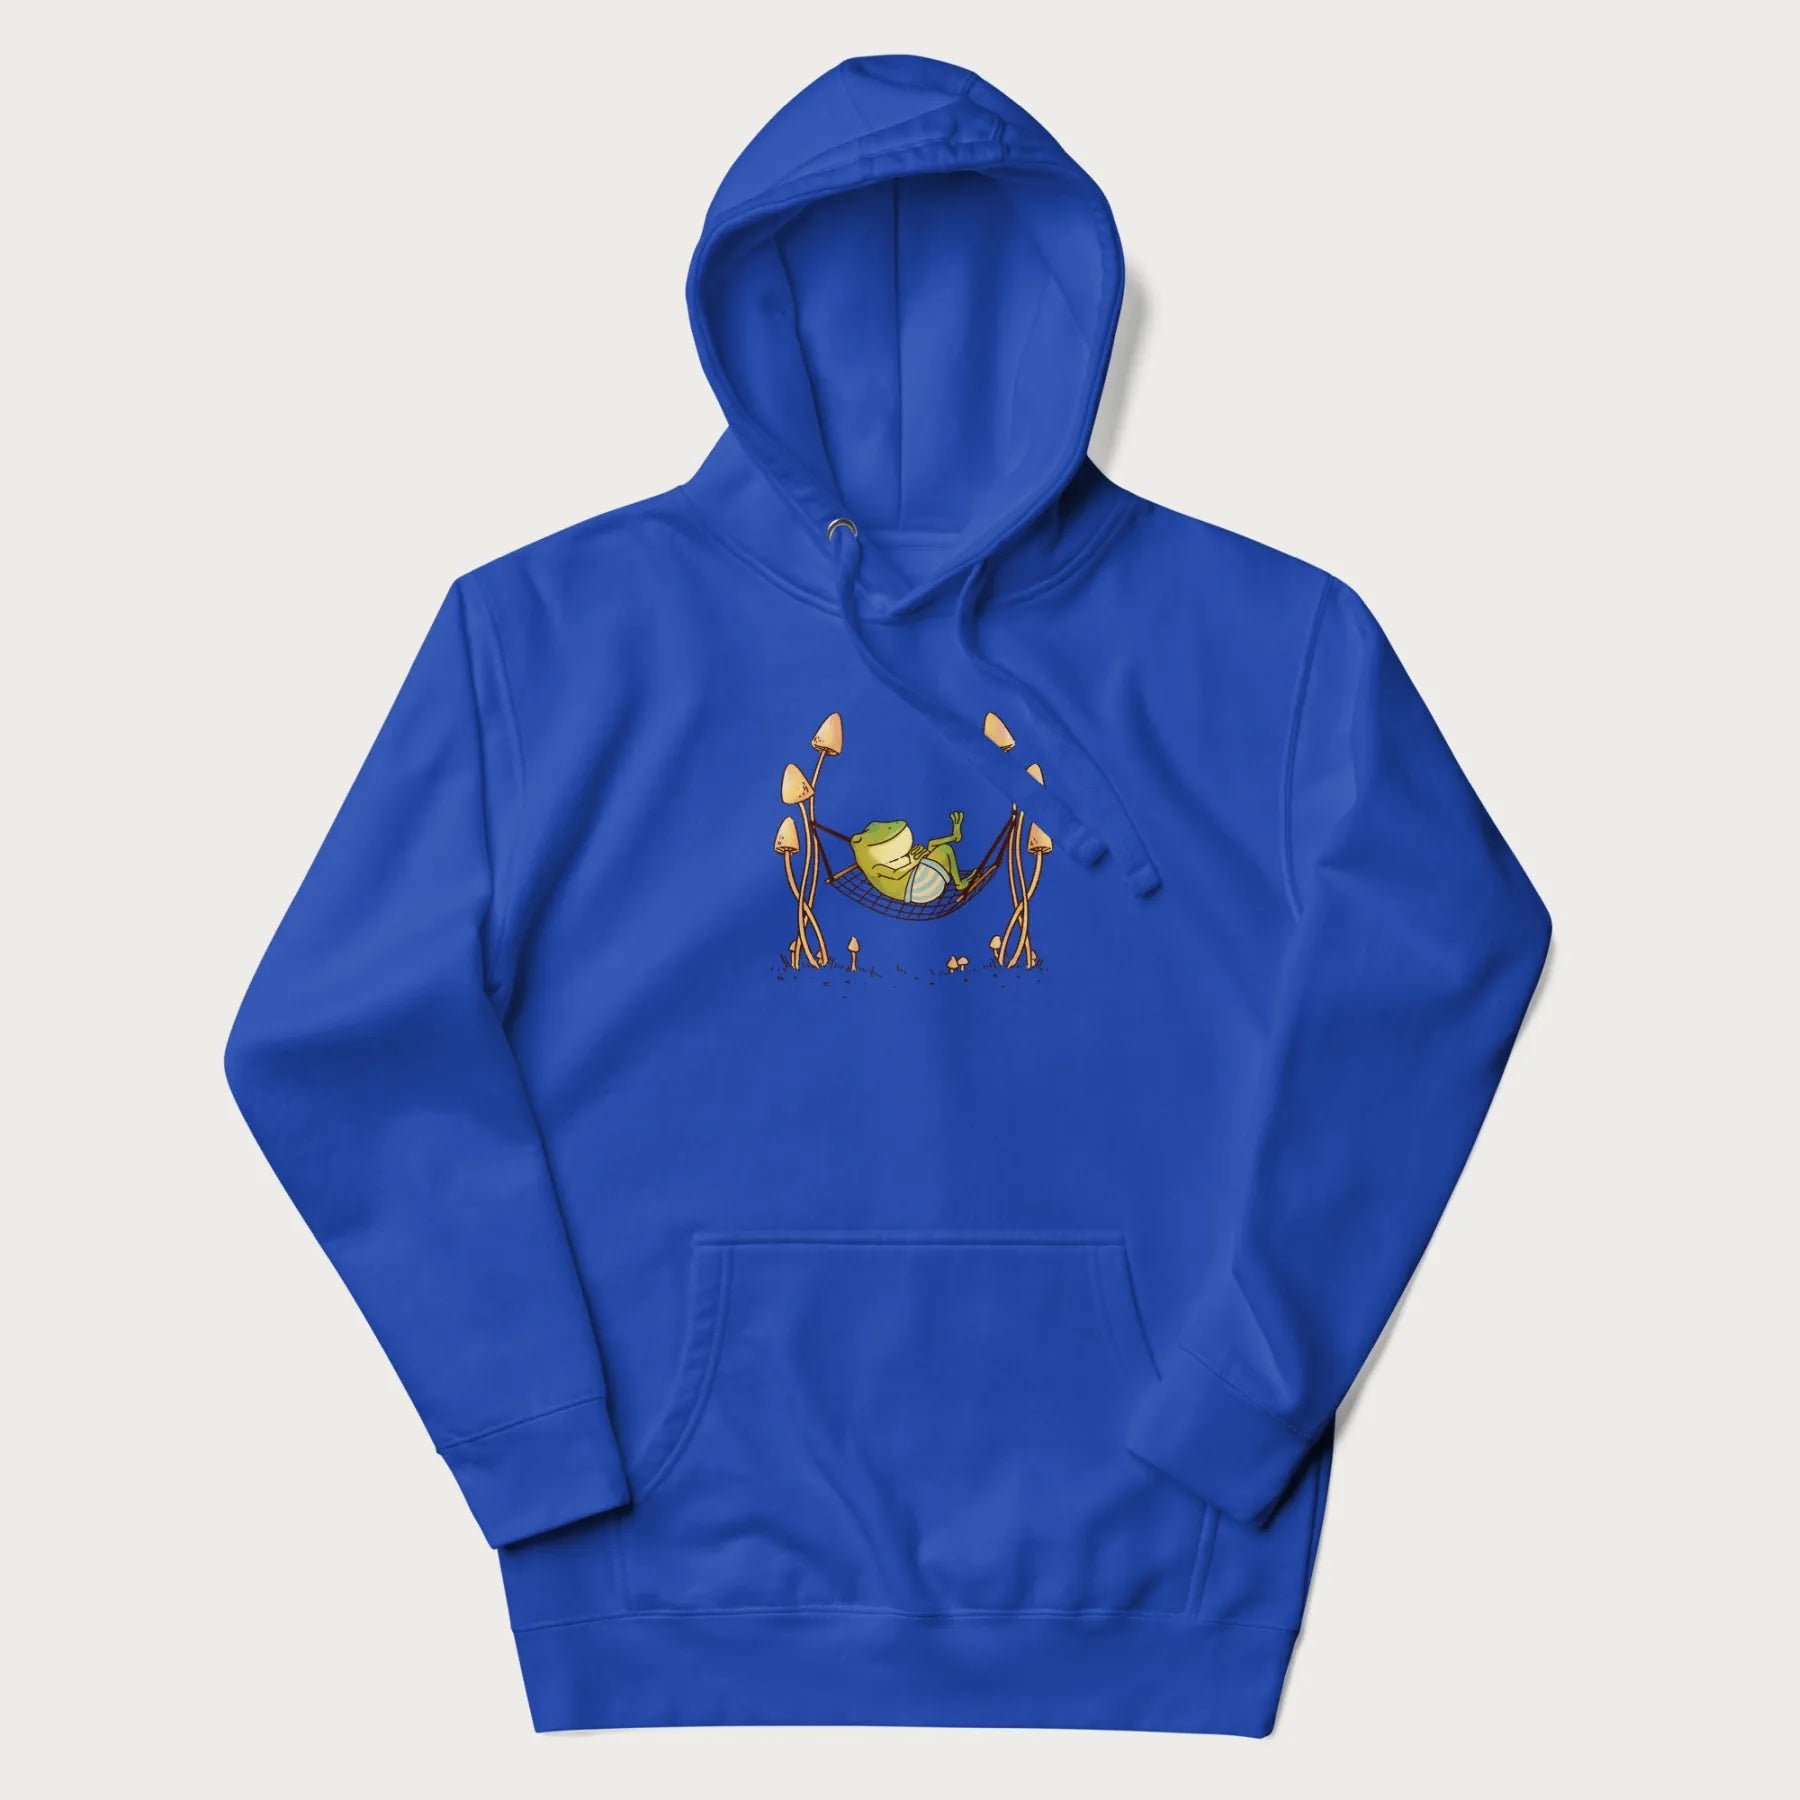 Royal blue hoodie with a graphic of a frog lounging in a hammock between tall mushrooms.